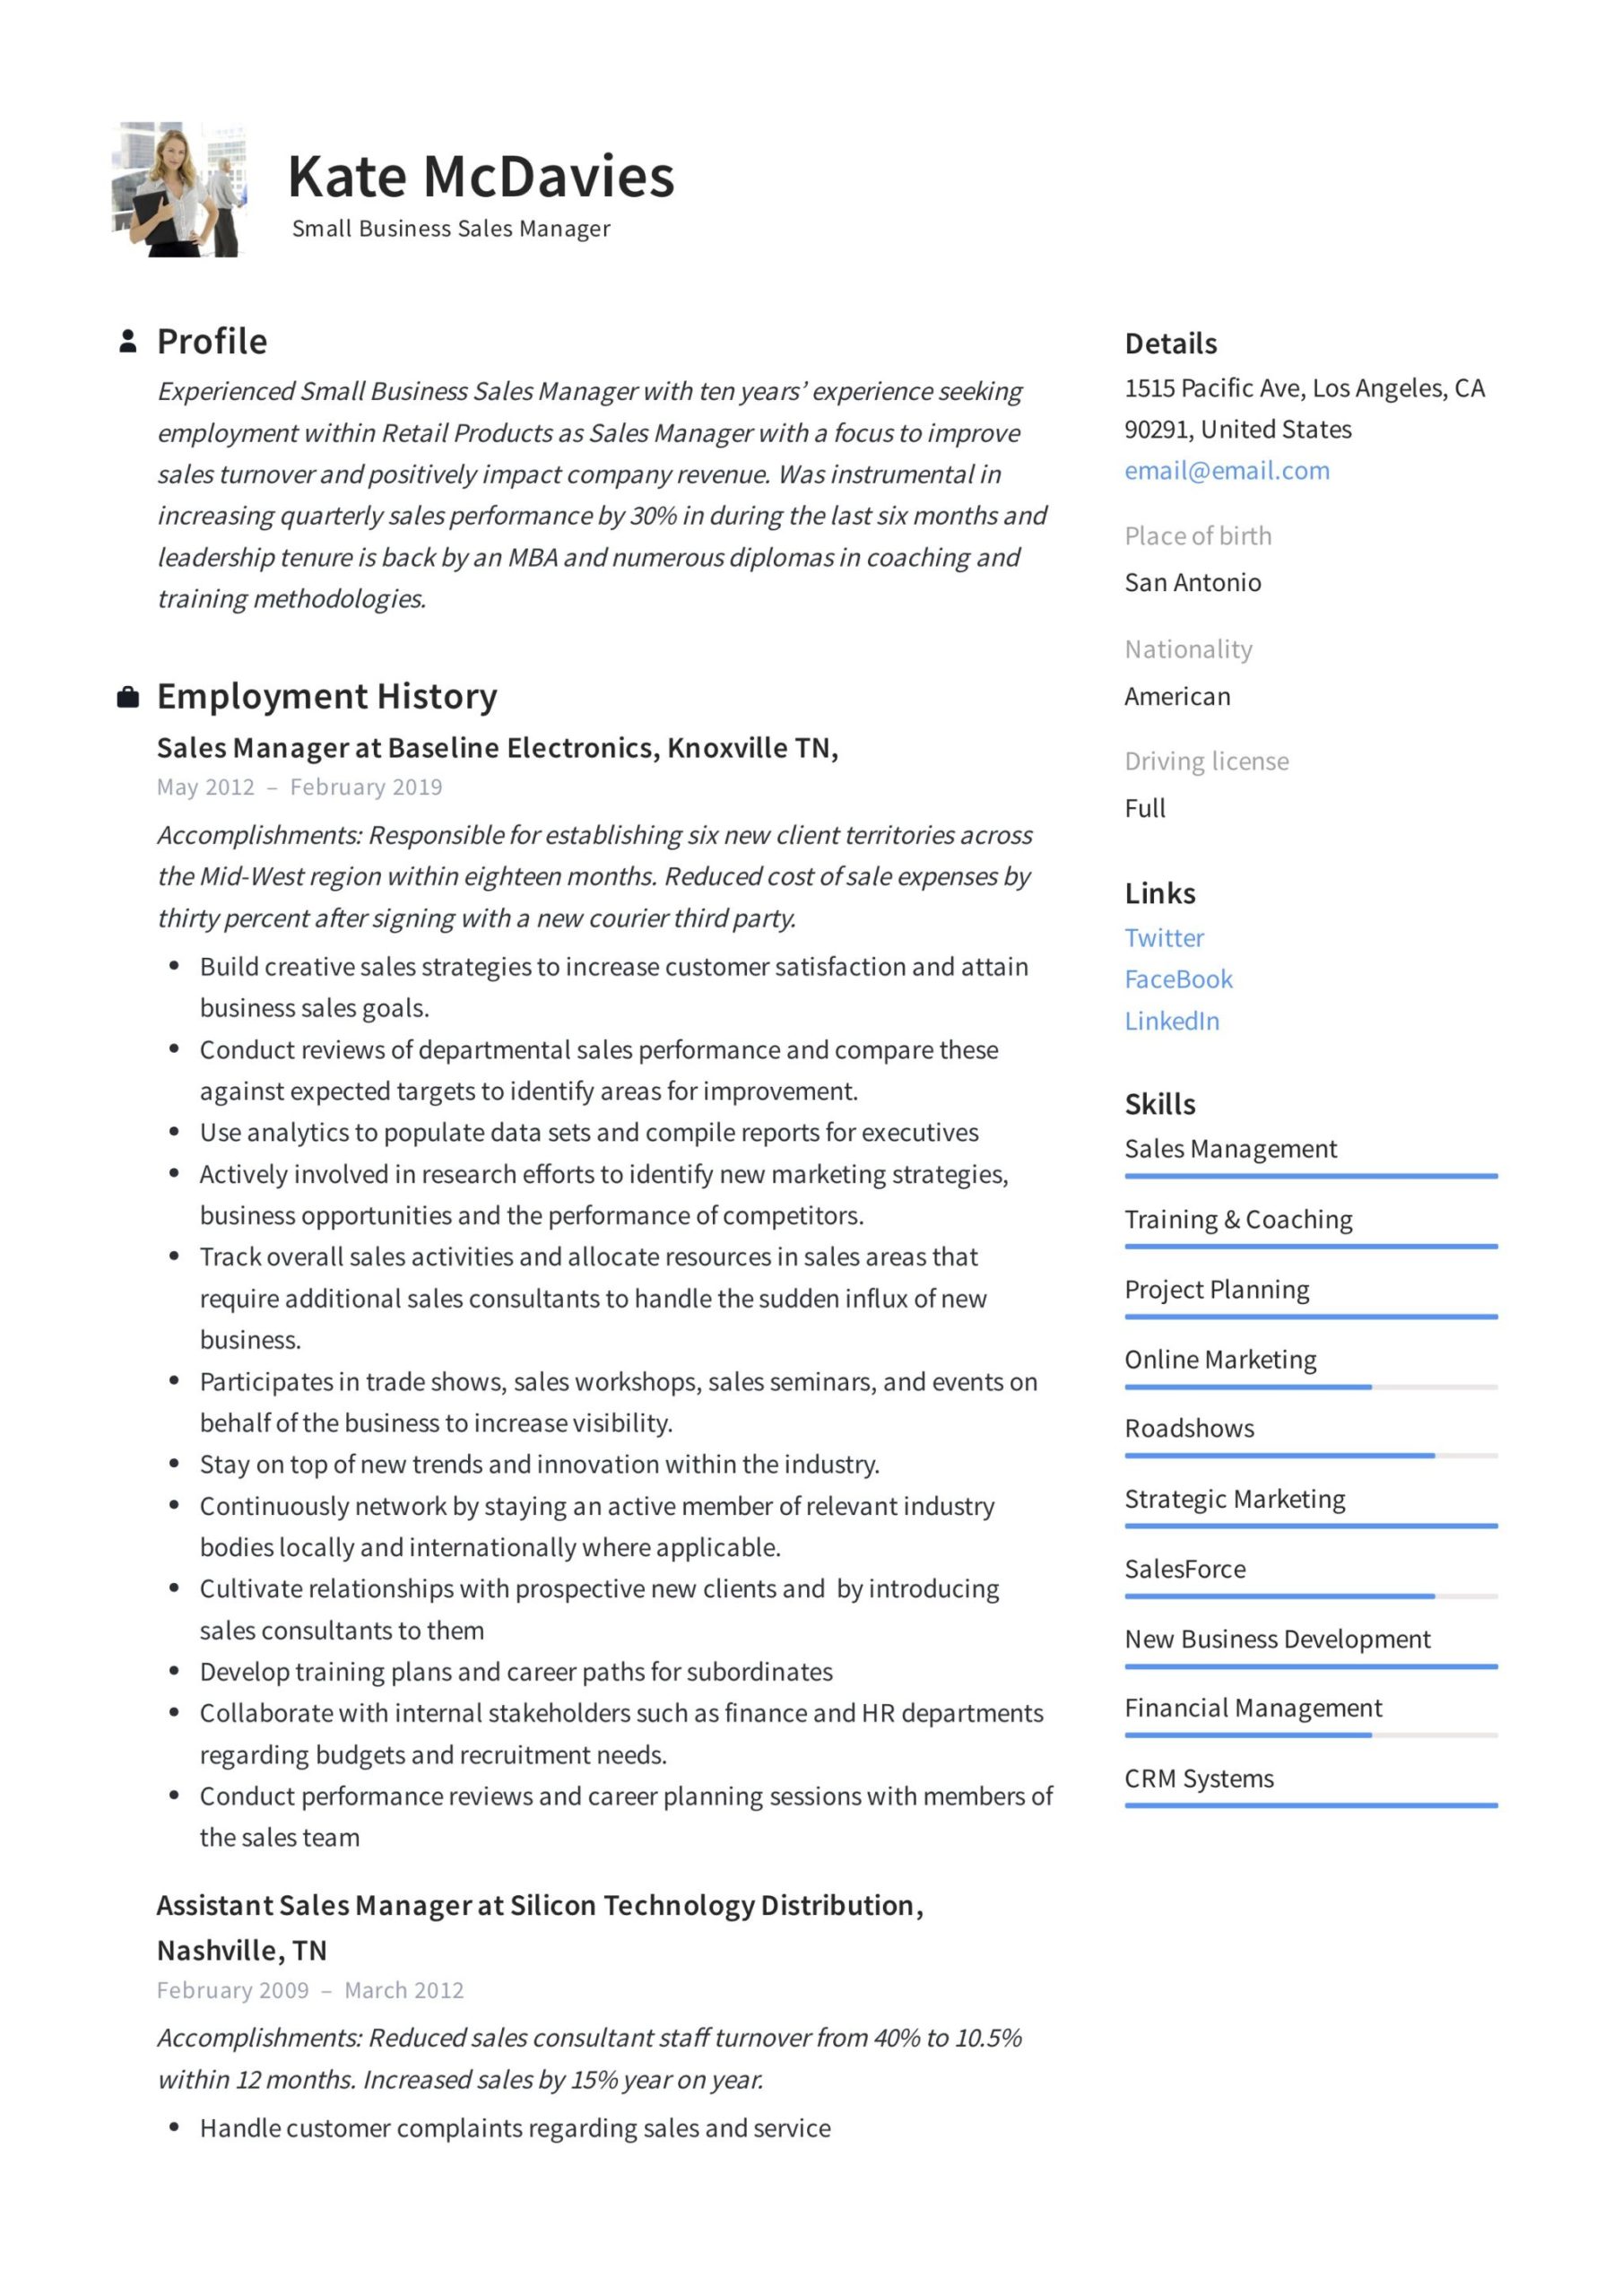 Regional Sales Manager who Manages Team Members Resume Sample Guide: Small Business Sales Manager Resume [x12] Sample Pdf 2020